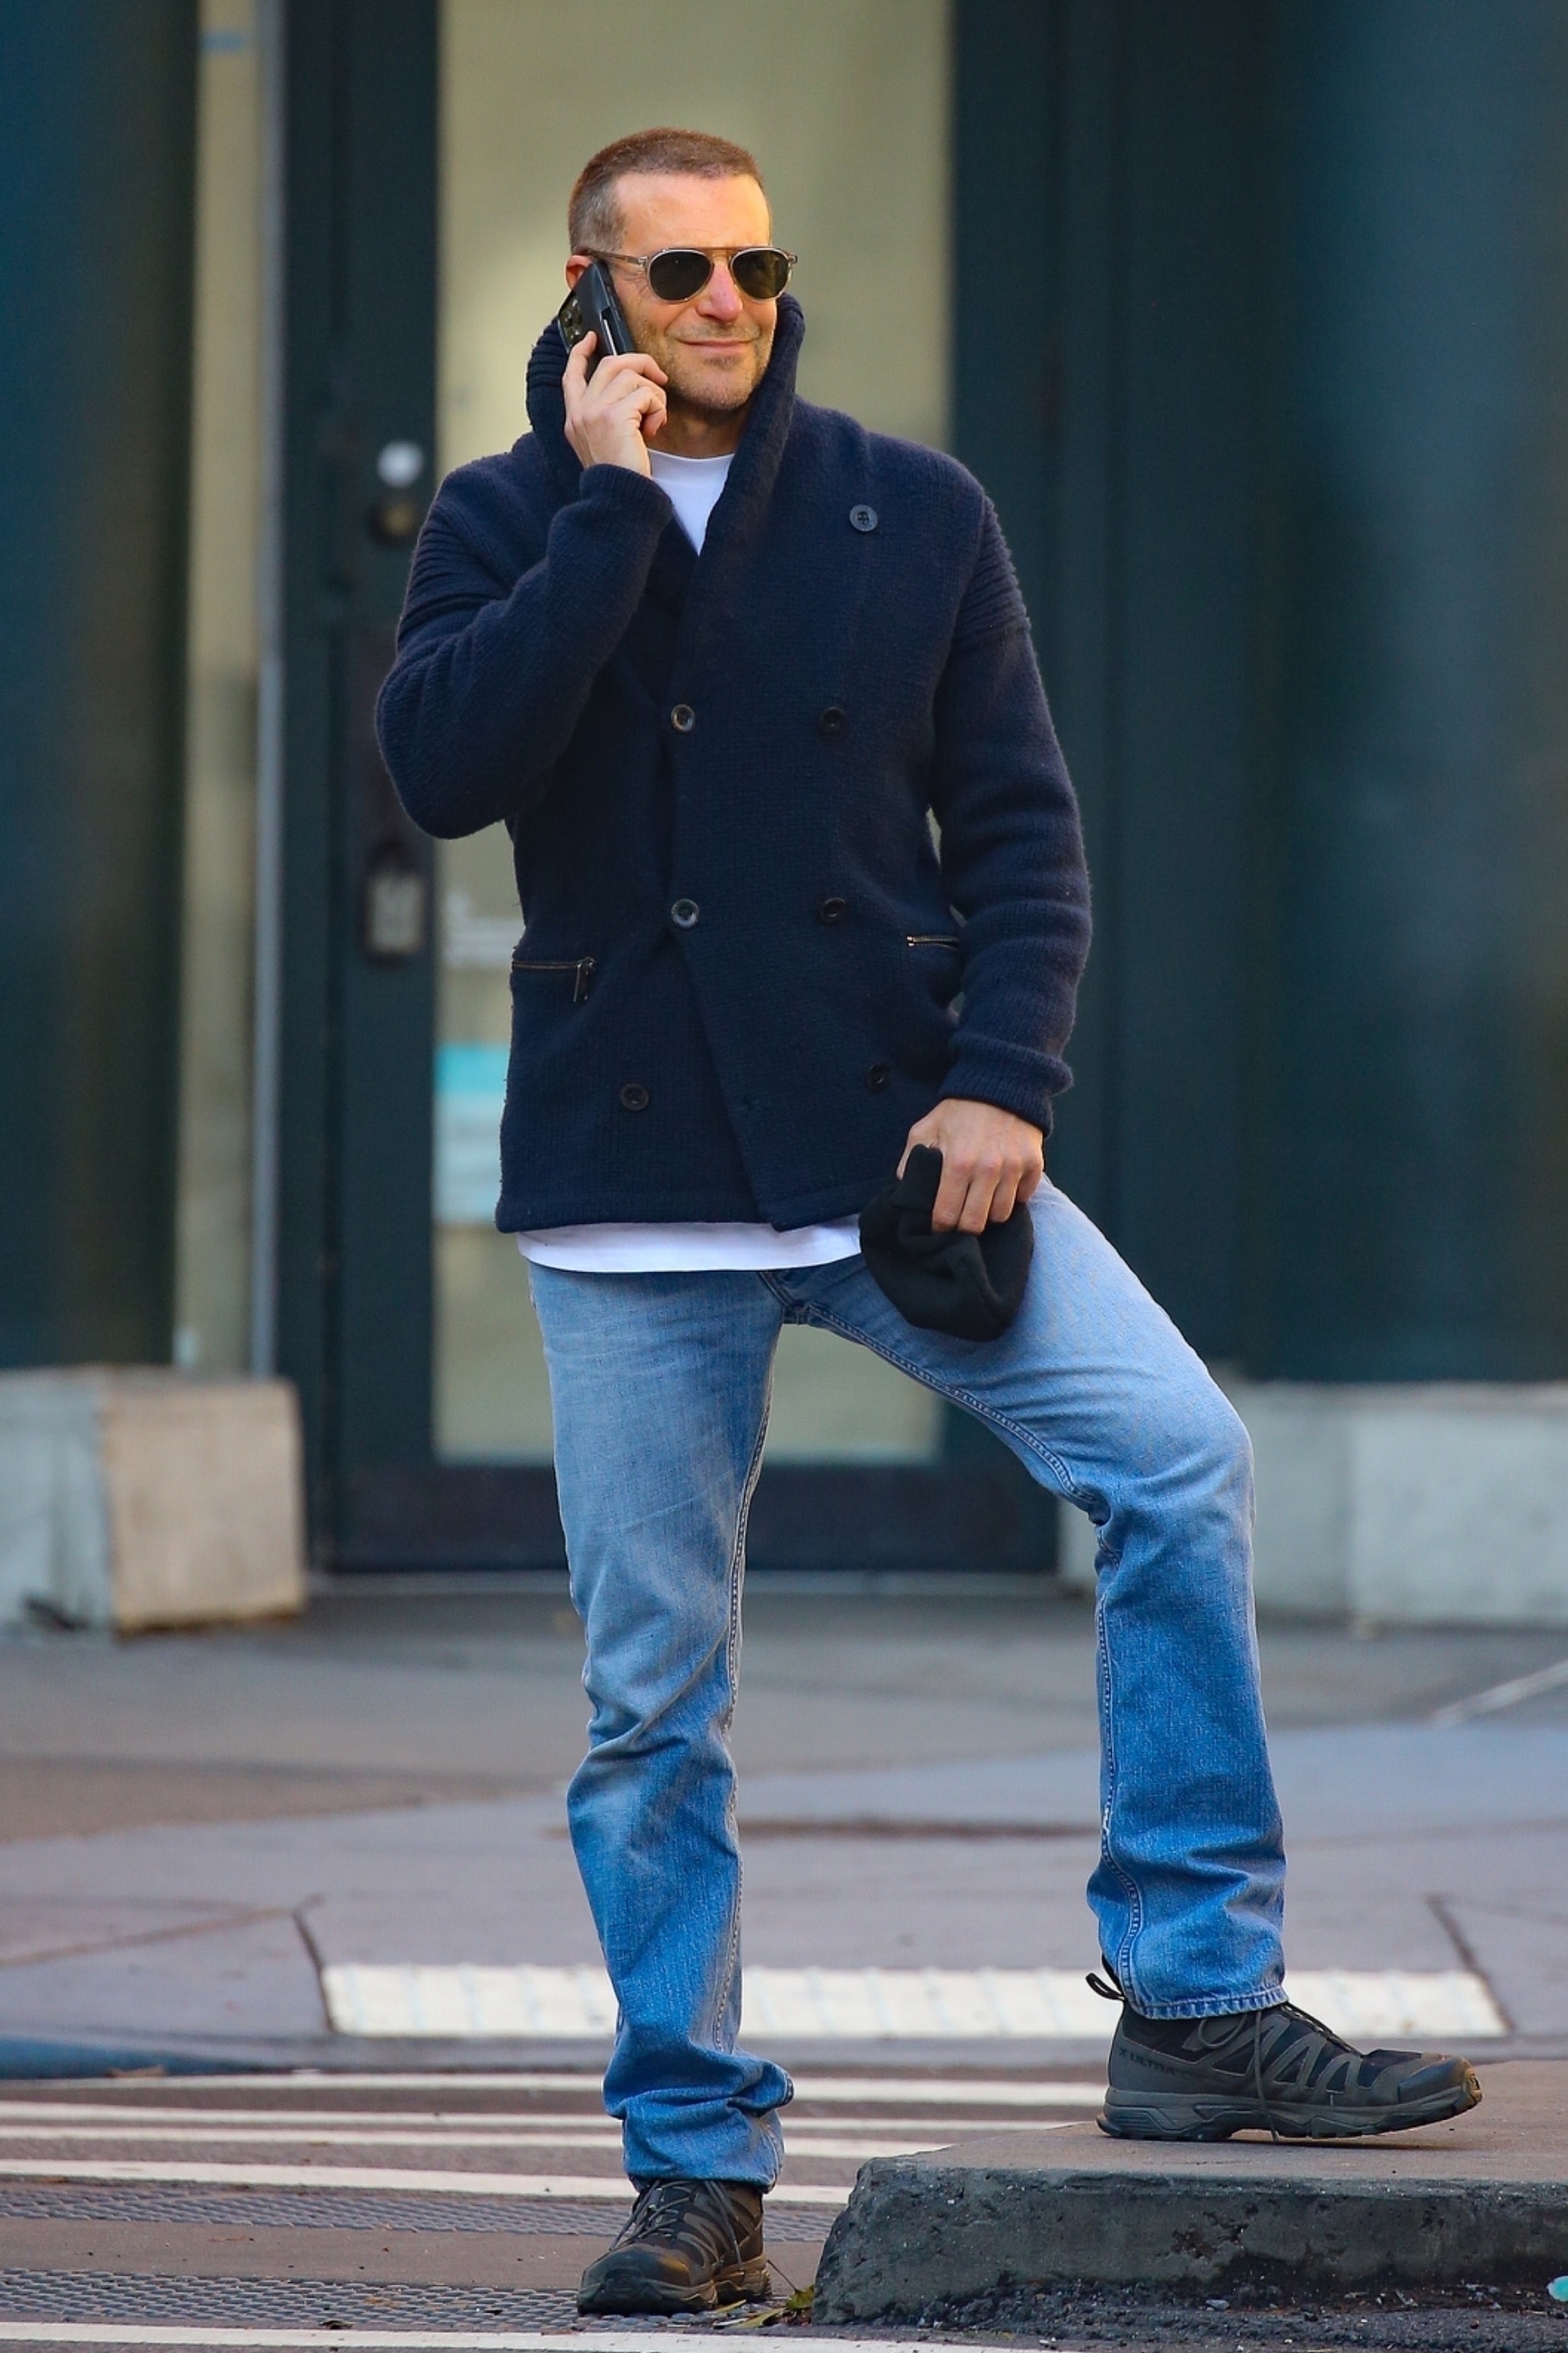 Actor Bradley Cooper wears a peacoat, jeans, and Salomon sneakers with sunglasses and a buzzcut hairdo